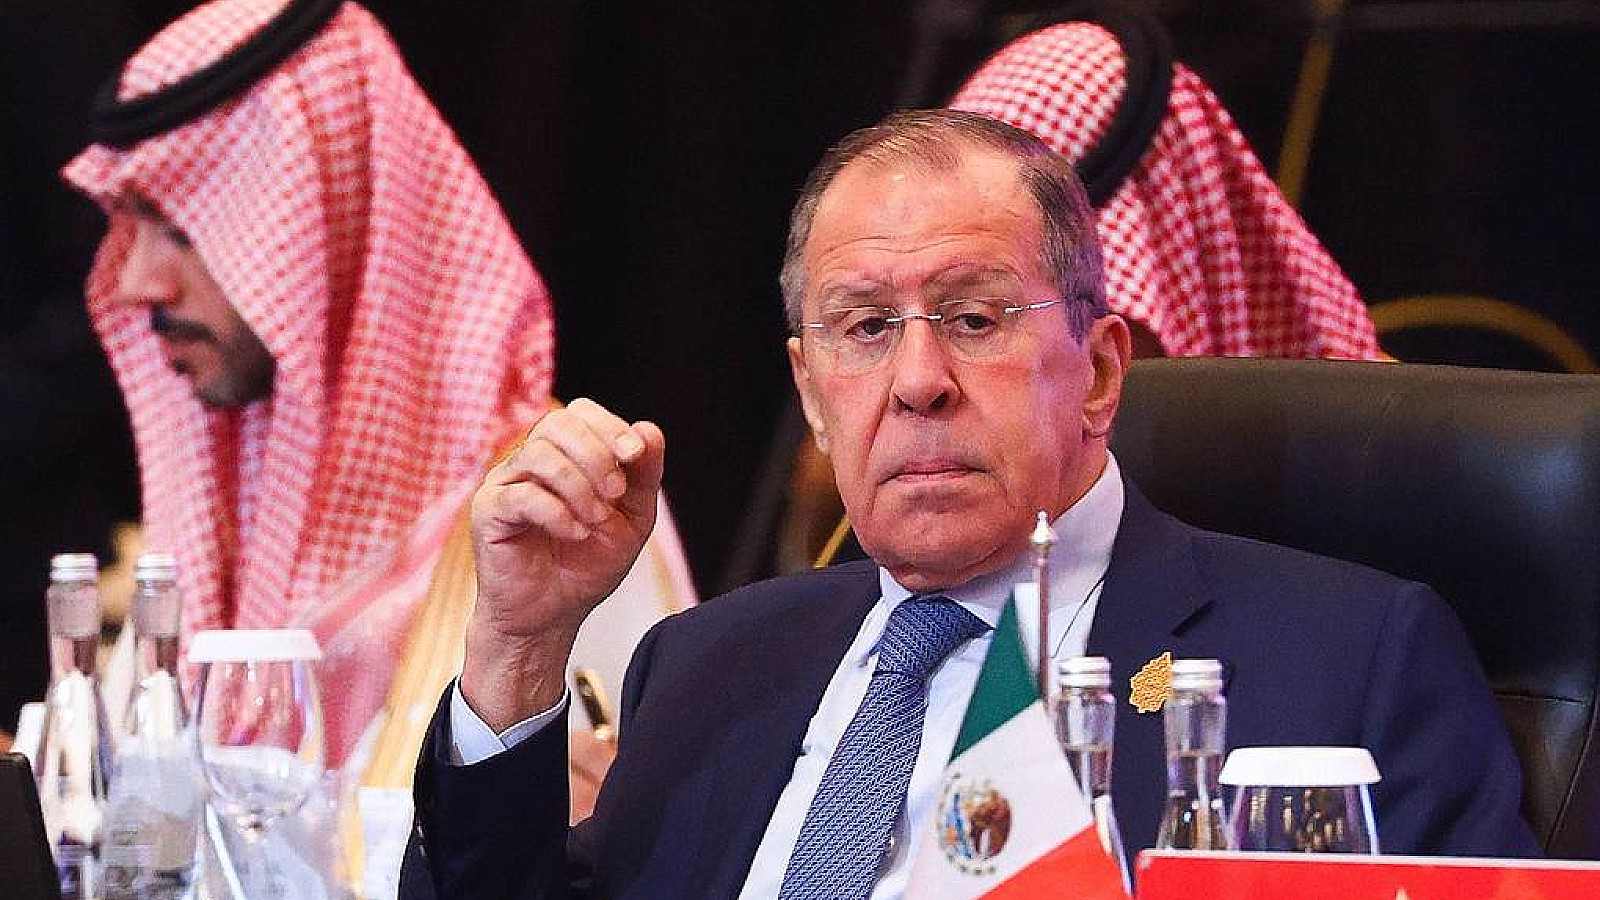 Russian foreign minister Sergey Lavrov at the 2022 G20 summit in Indonesia | TASS